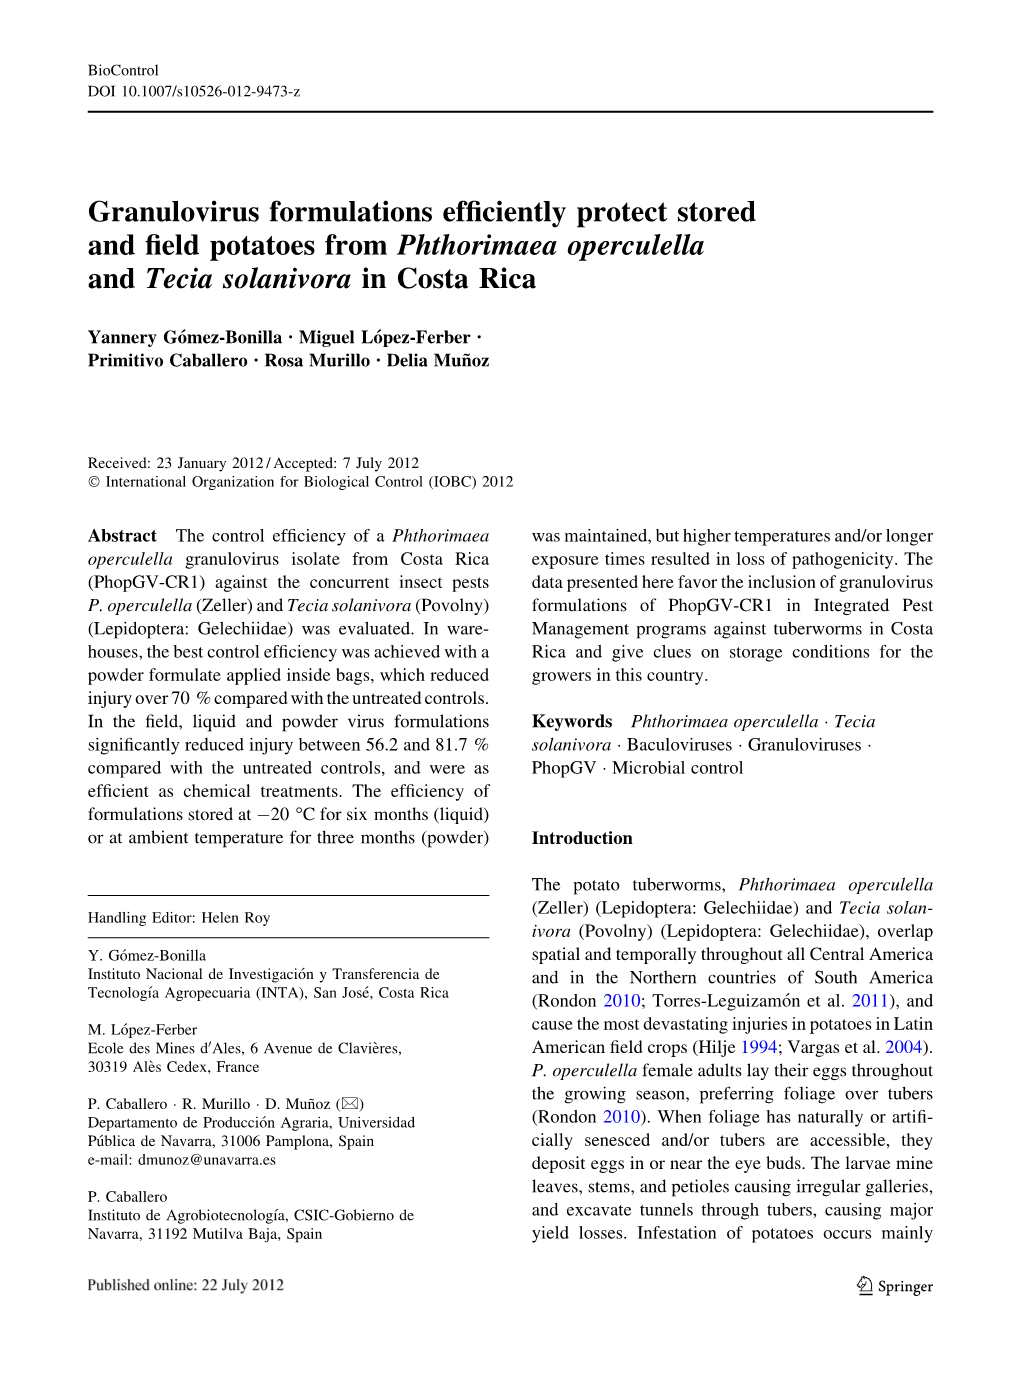 Granulovirus Formulations Efficiently Protect Stored and Field Potatoes